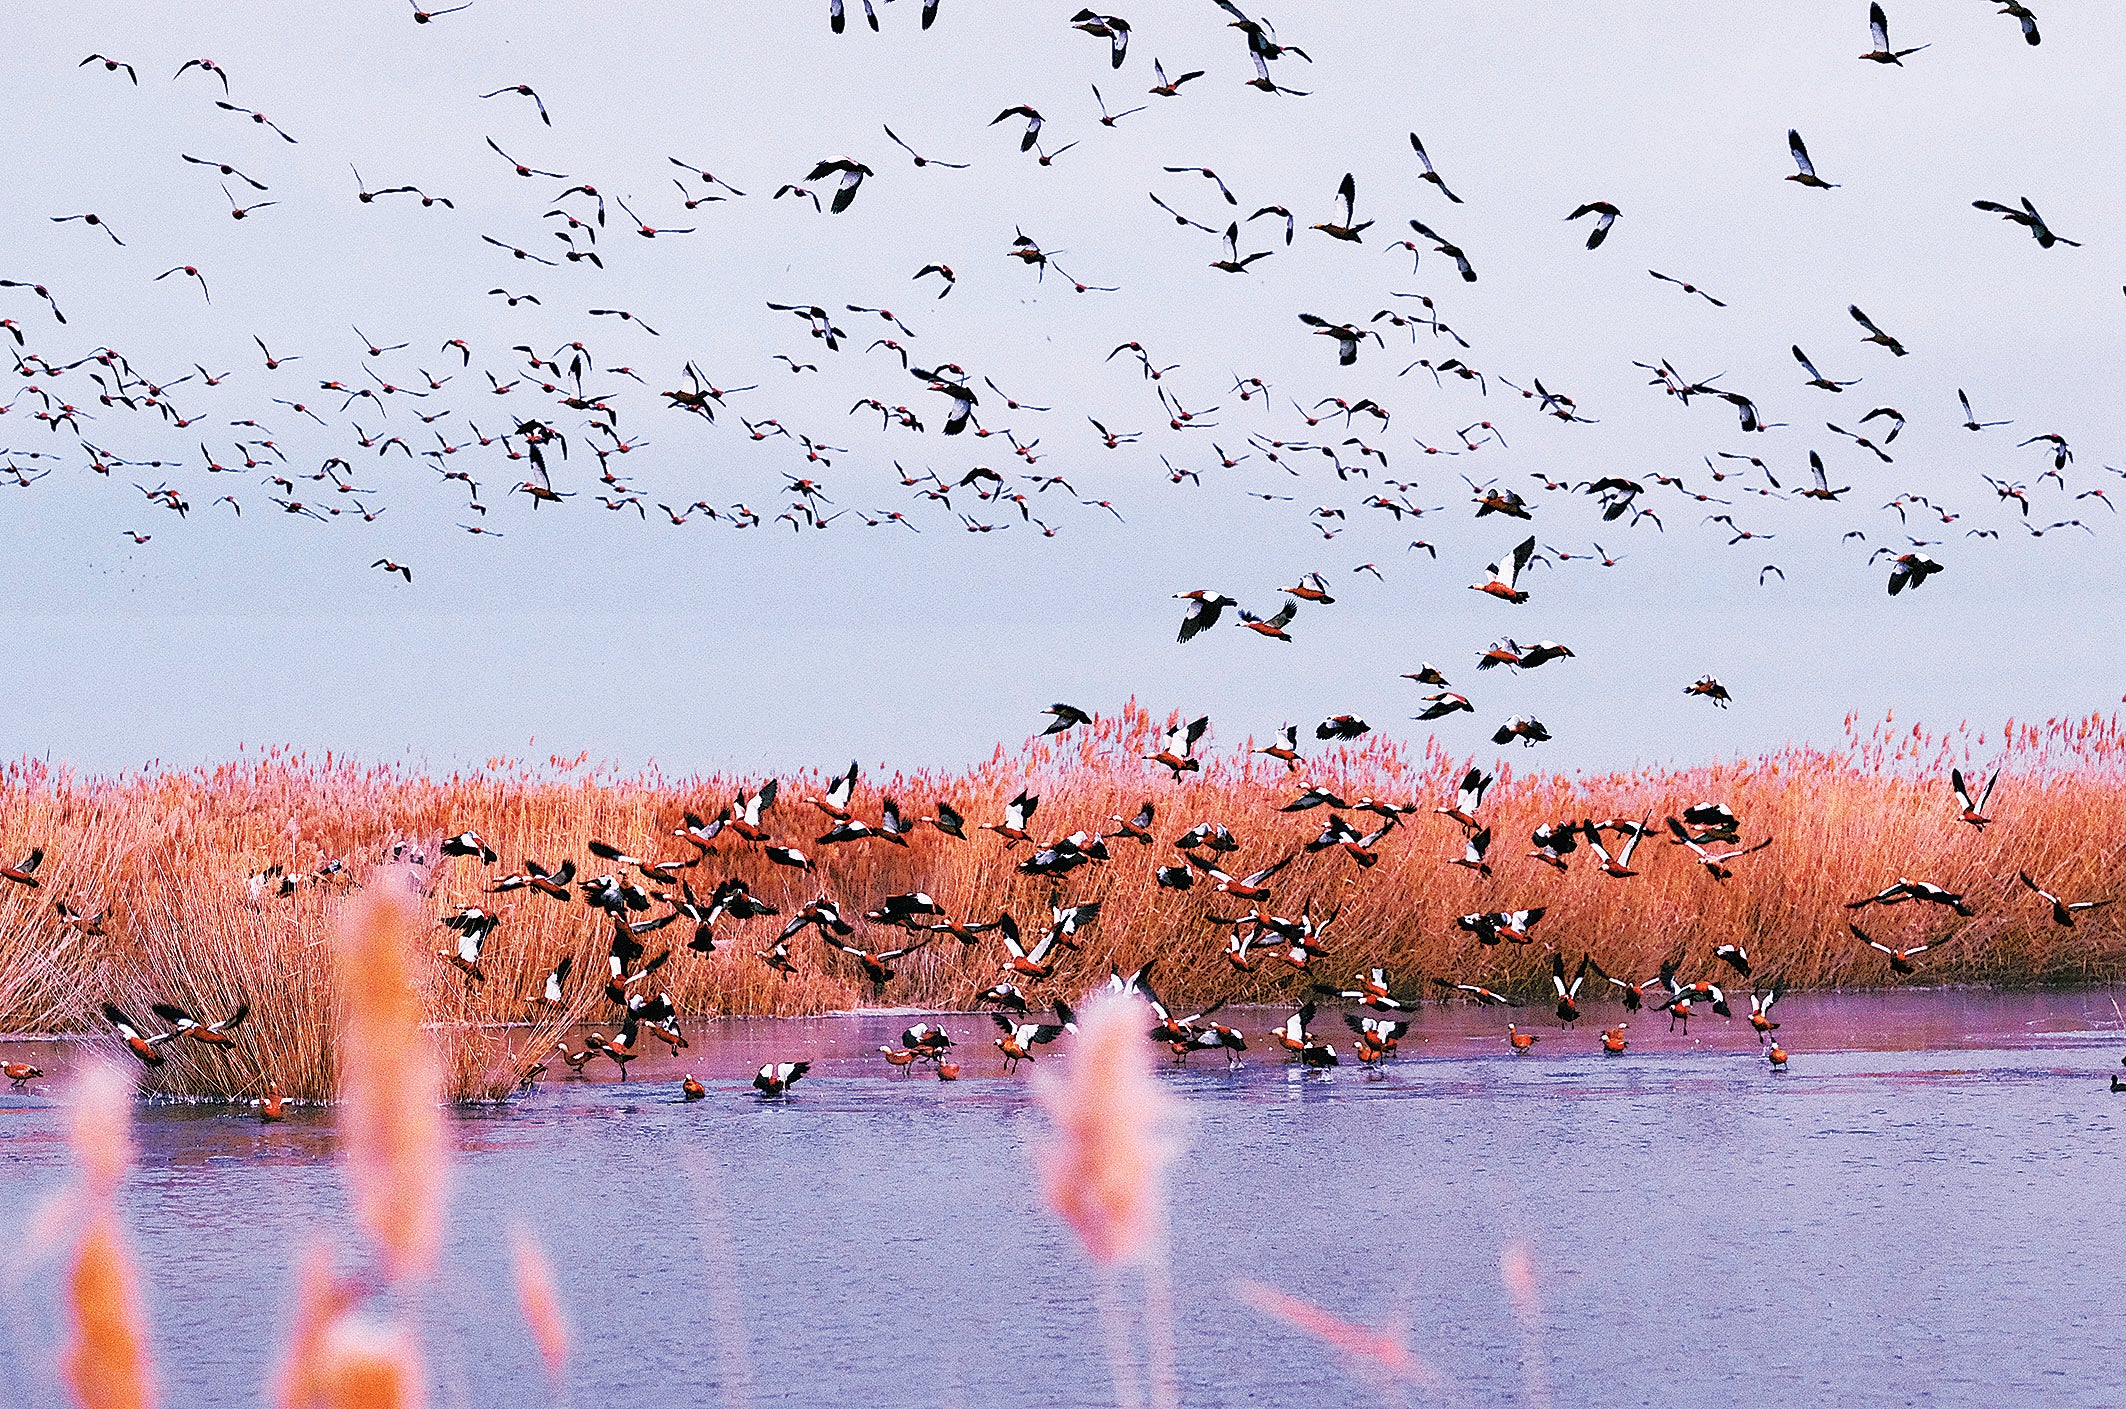 Migratory birds fly above Ulansuhai Nur in Bayannuur, Inner Mongolia autonomous region, which is an important stop for avian visitors